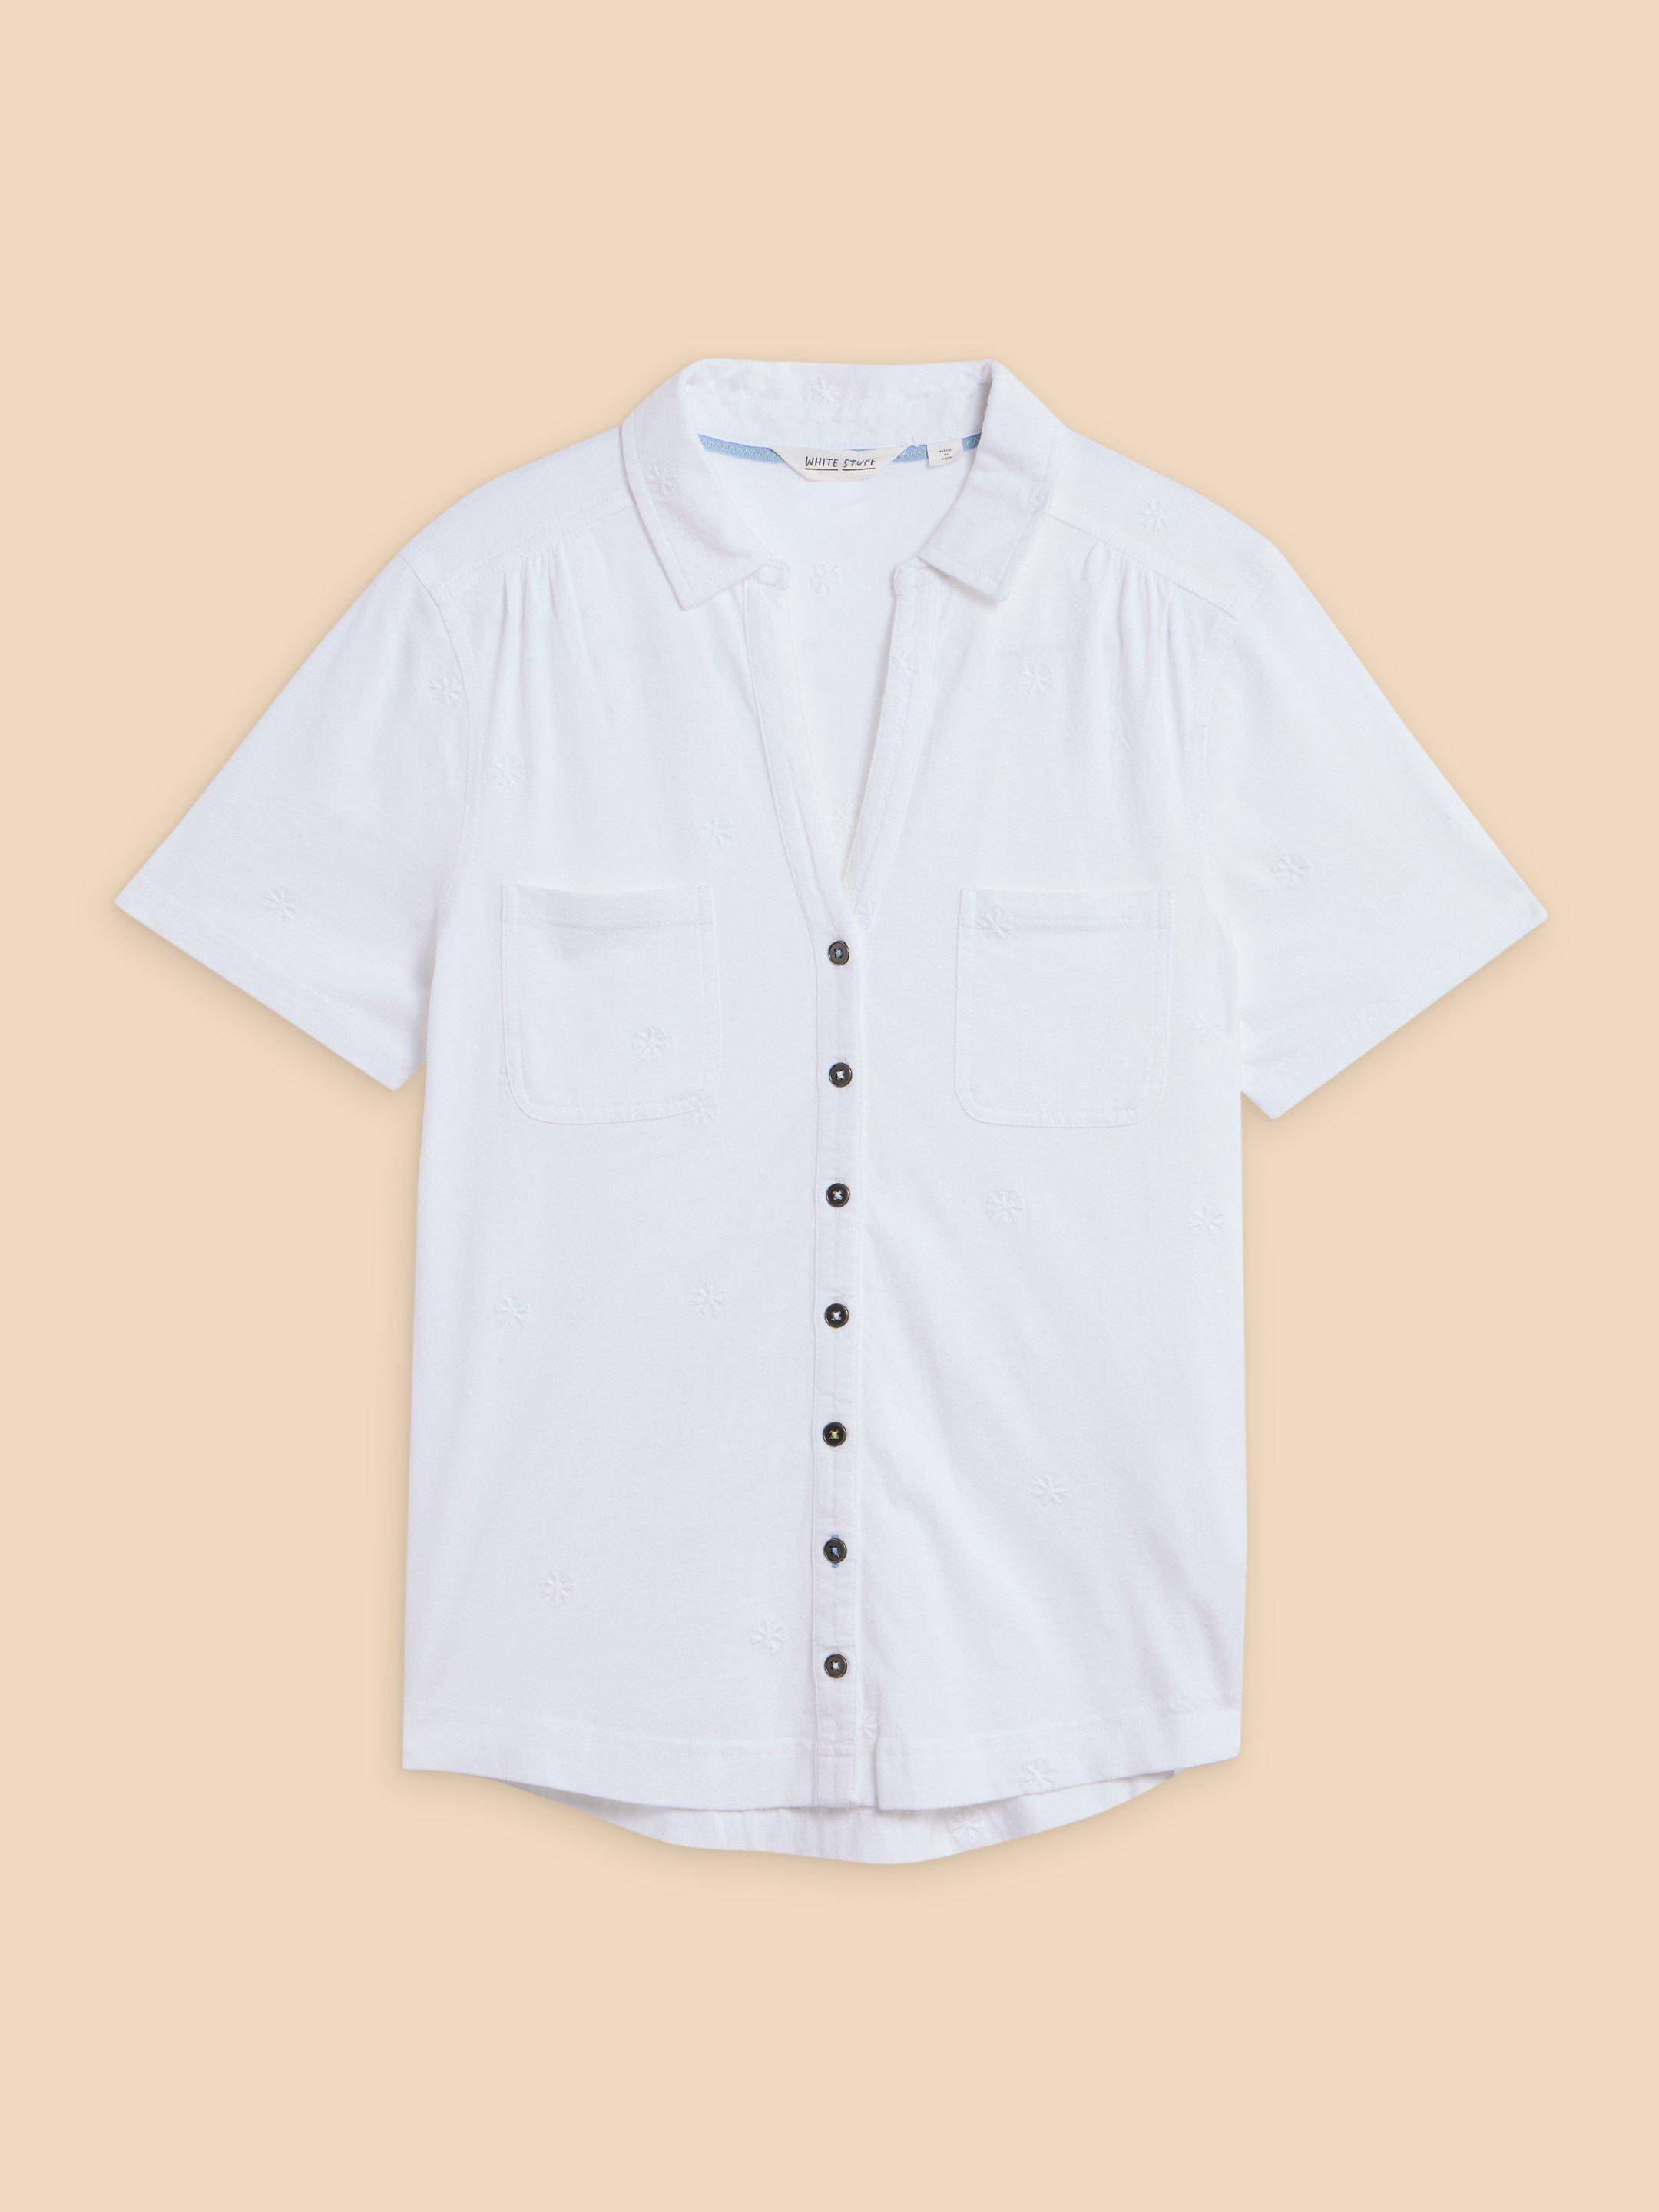 PENNY POCKET EMBROIDERED SHIRT in PALE IVORY - FLAT FRONT